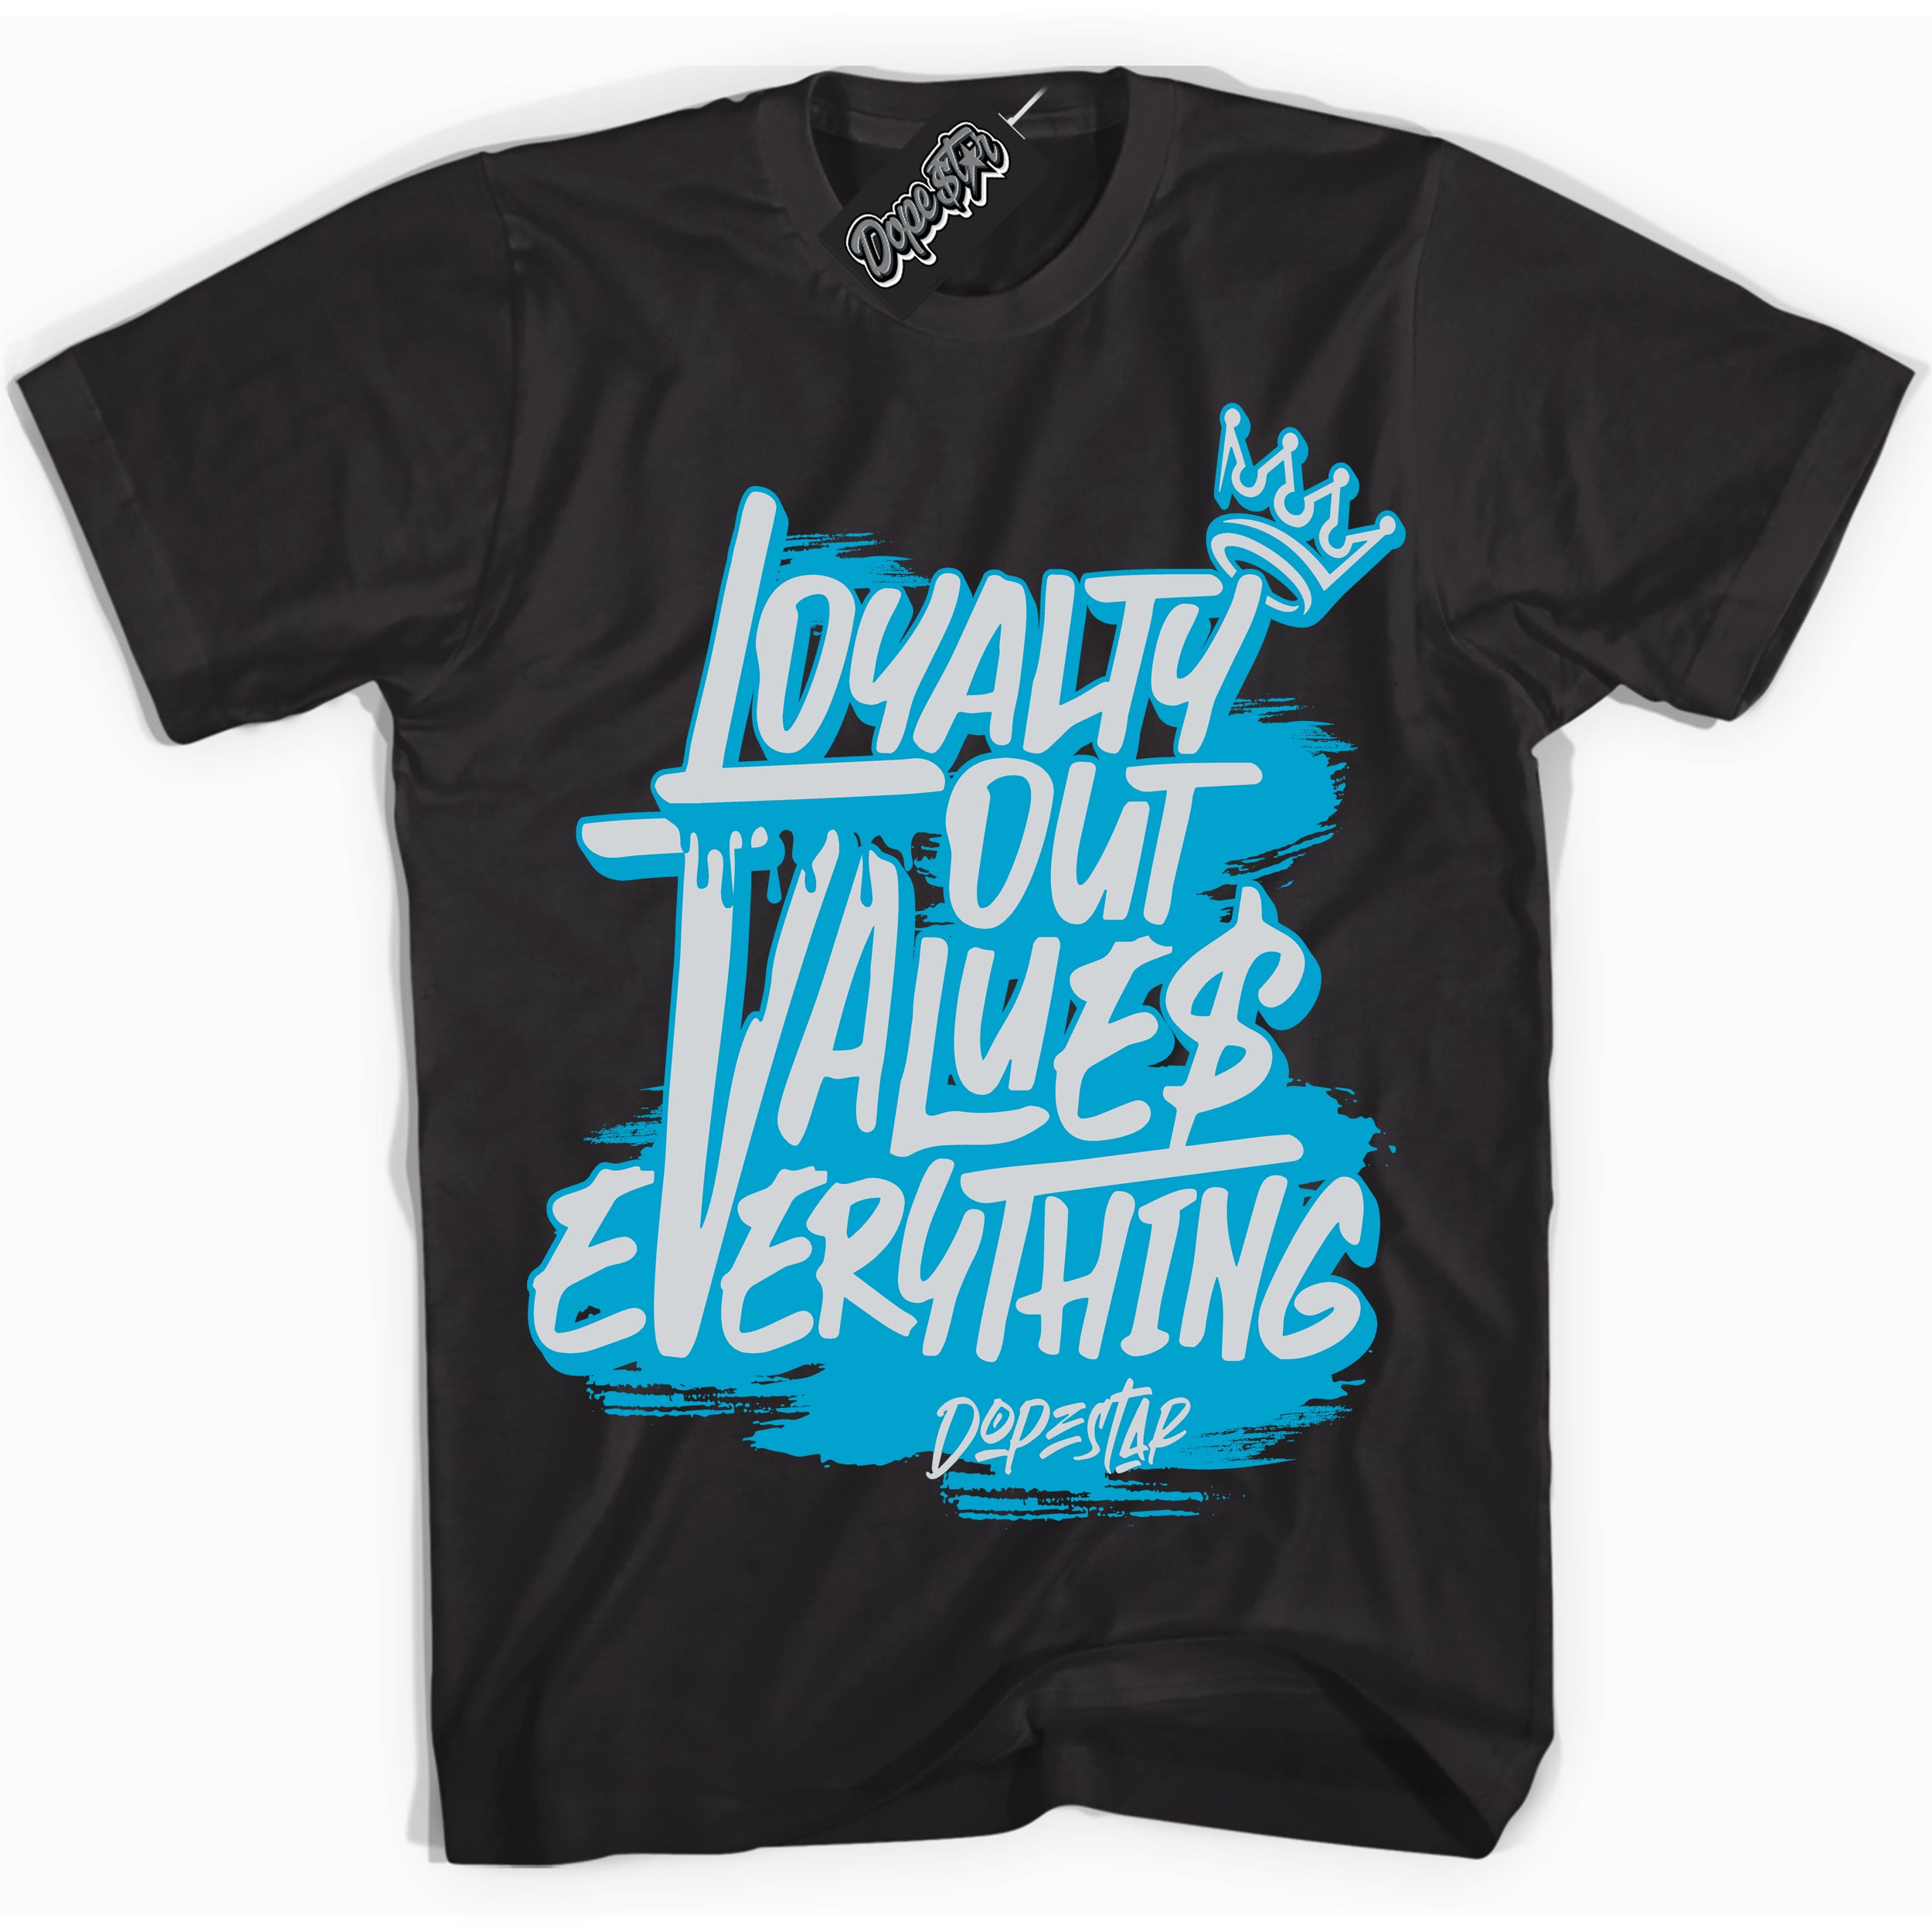 Cool Black Shirt with “ Loyalty Out Values Everything” design that perfectly matches Pure Platinum Blue Lightning Sneakers.